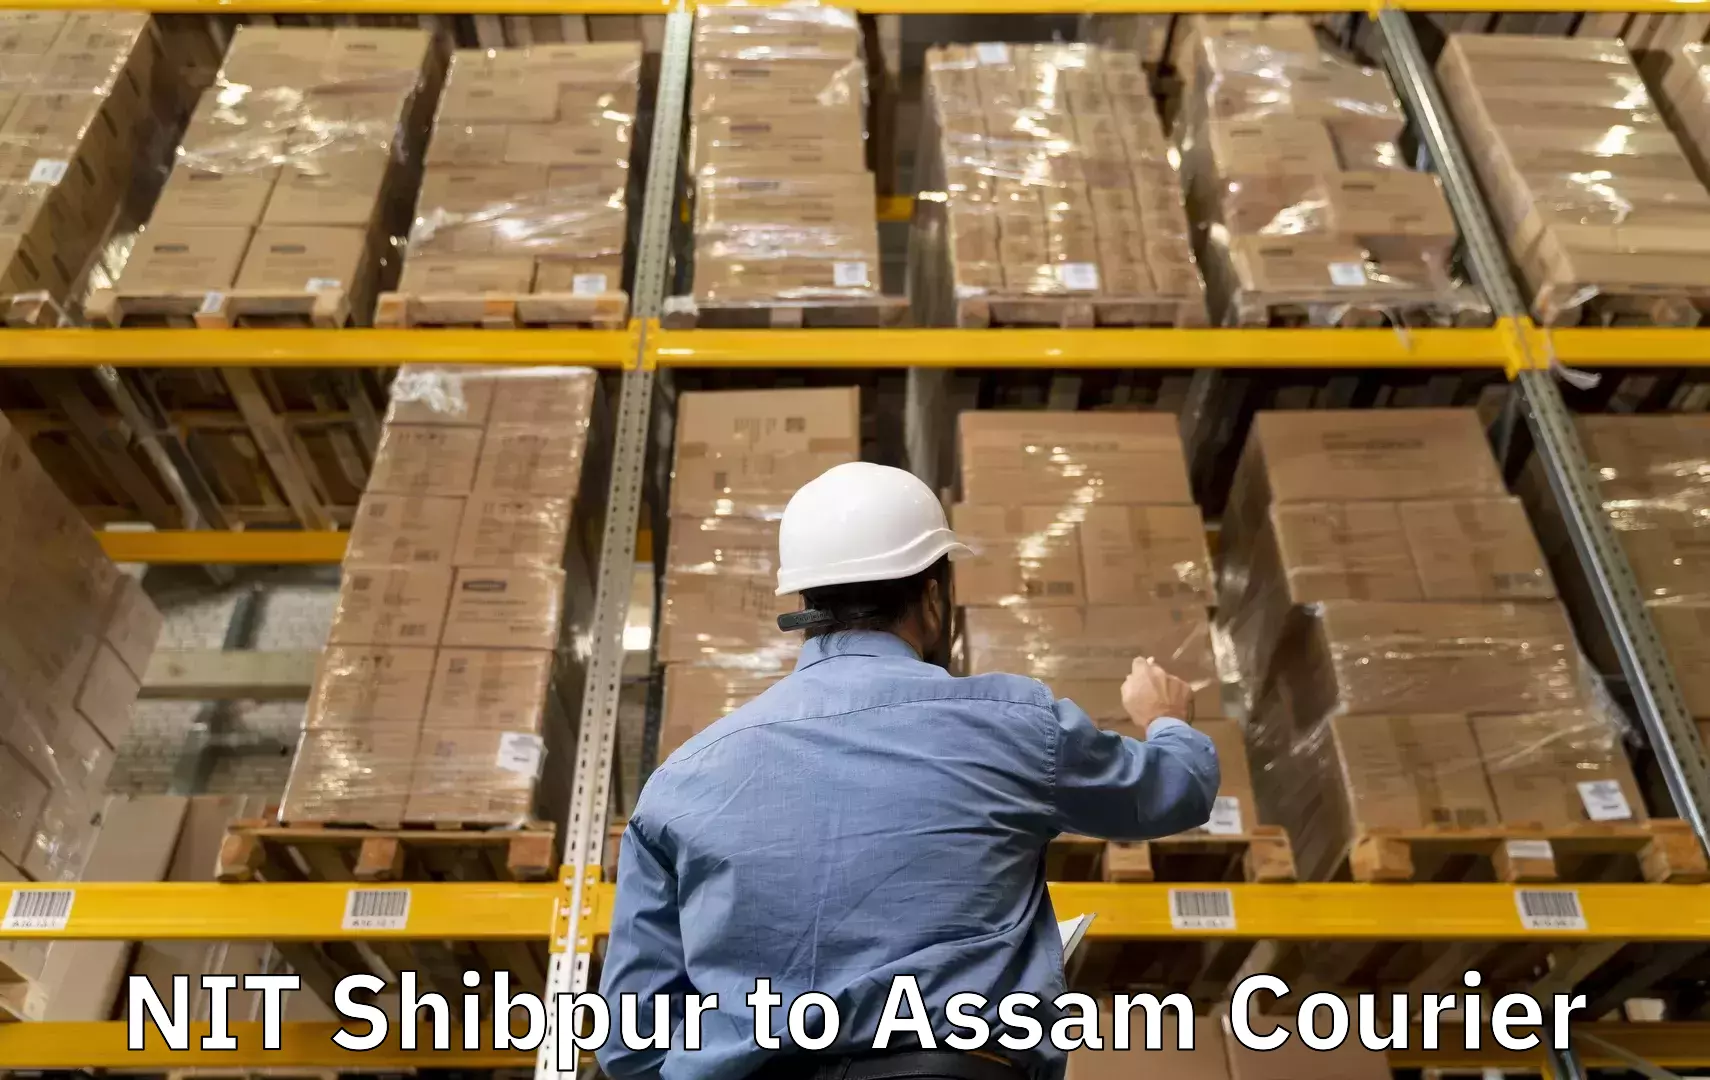 Luggage delivery app NIT Shibpur to Assam